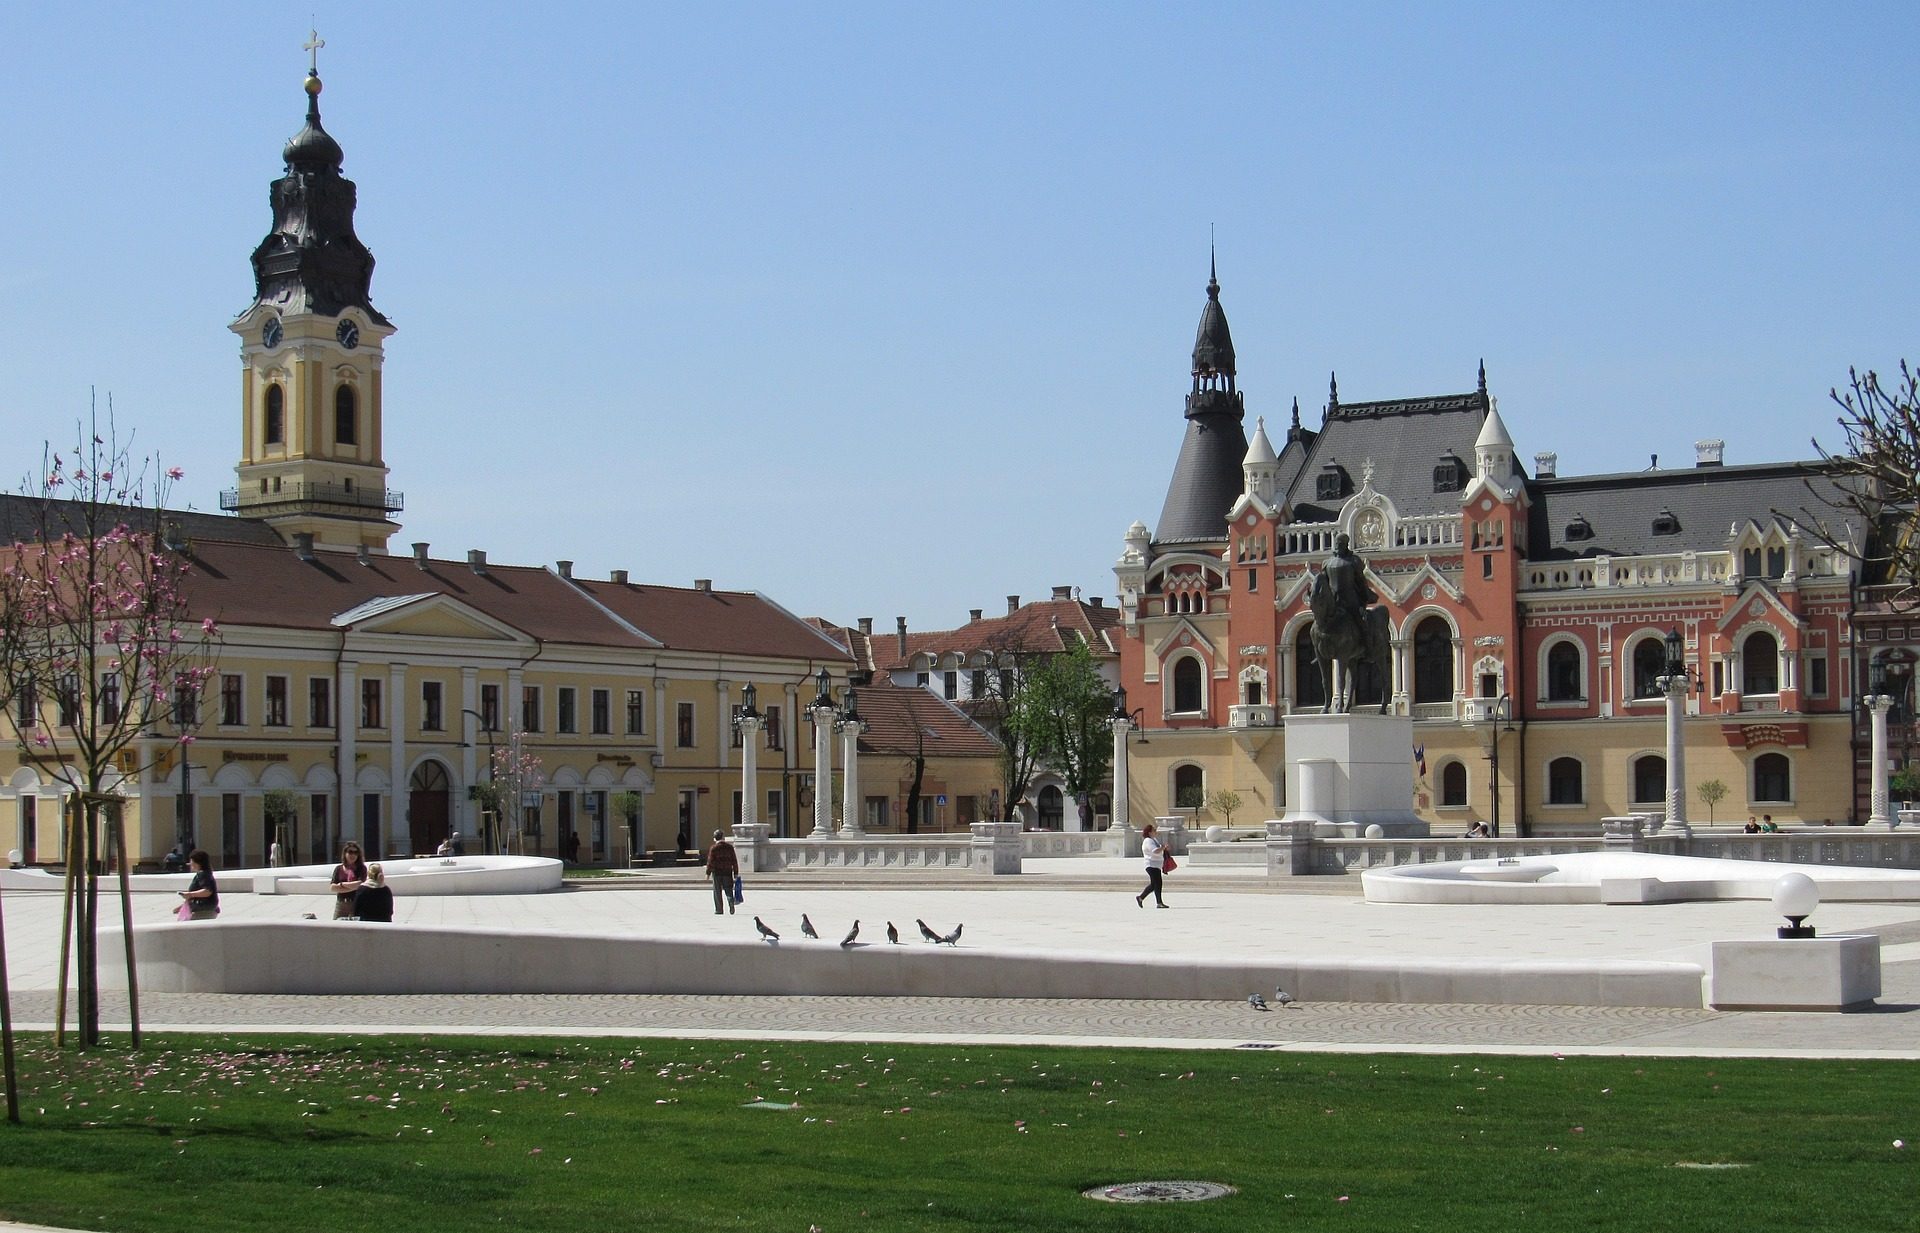 Local Party Warns of Silent Destruction of Hungarian Community in Transylvania